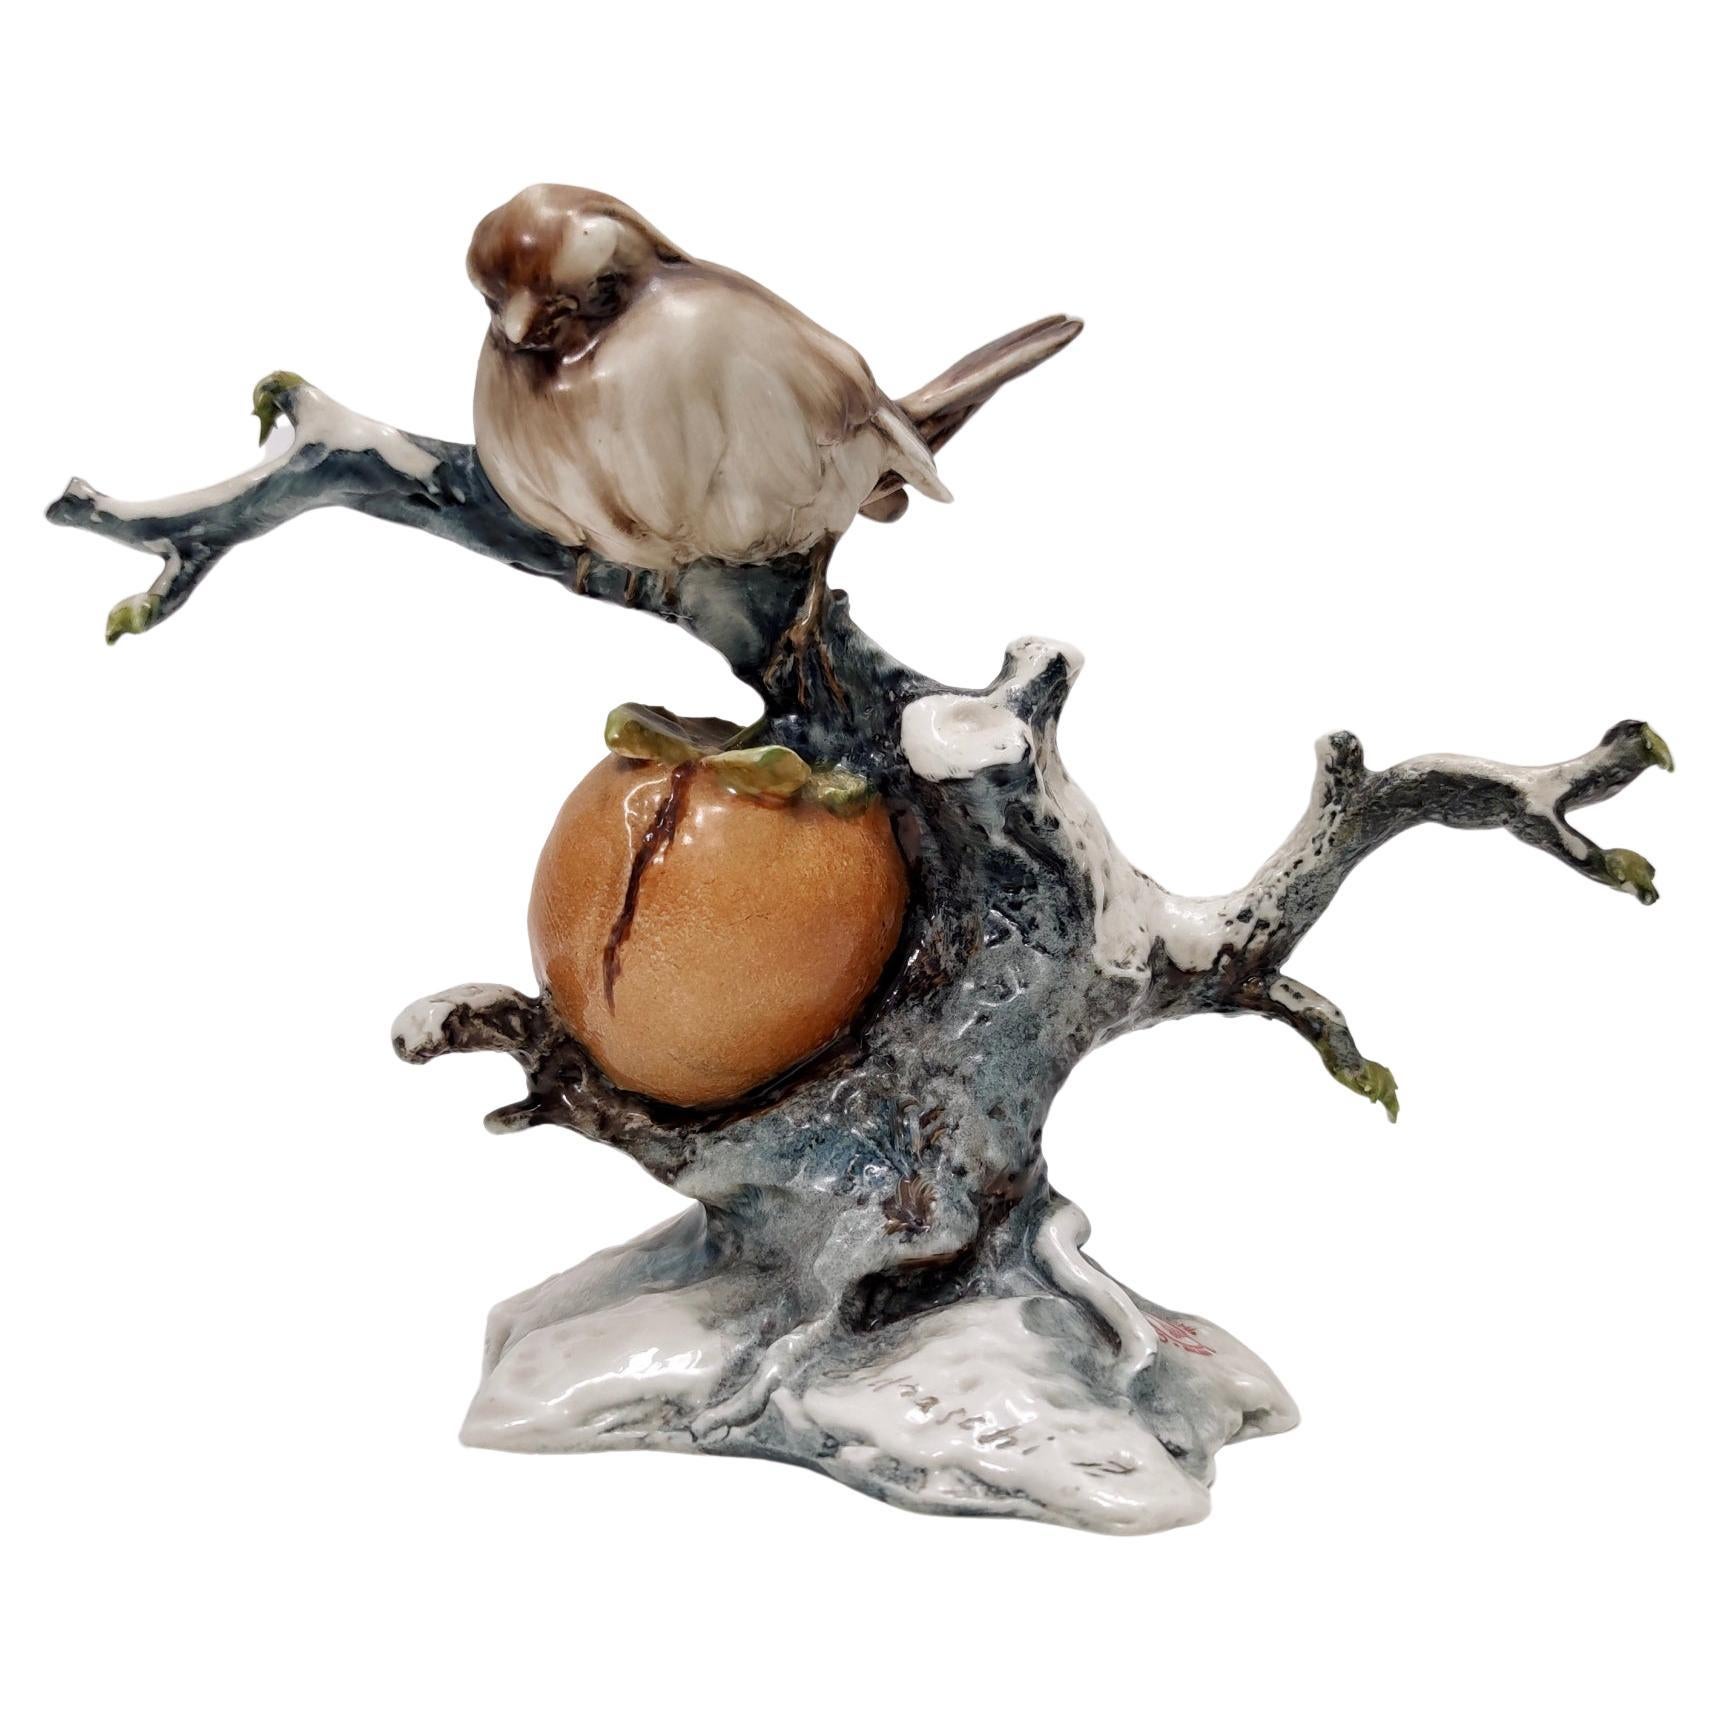 Vintage Hand-Painted and Lacquered Ceramic Bird by Piero Cedraschi, Italy  at 1stDibs